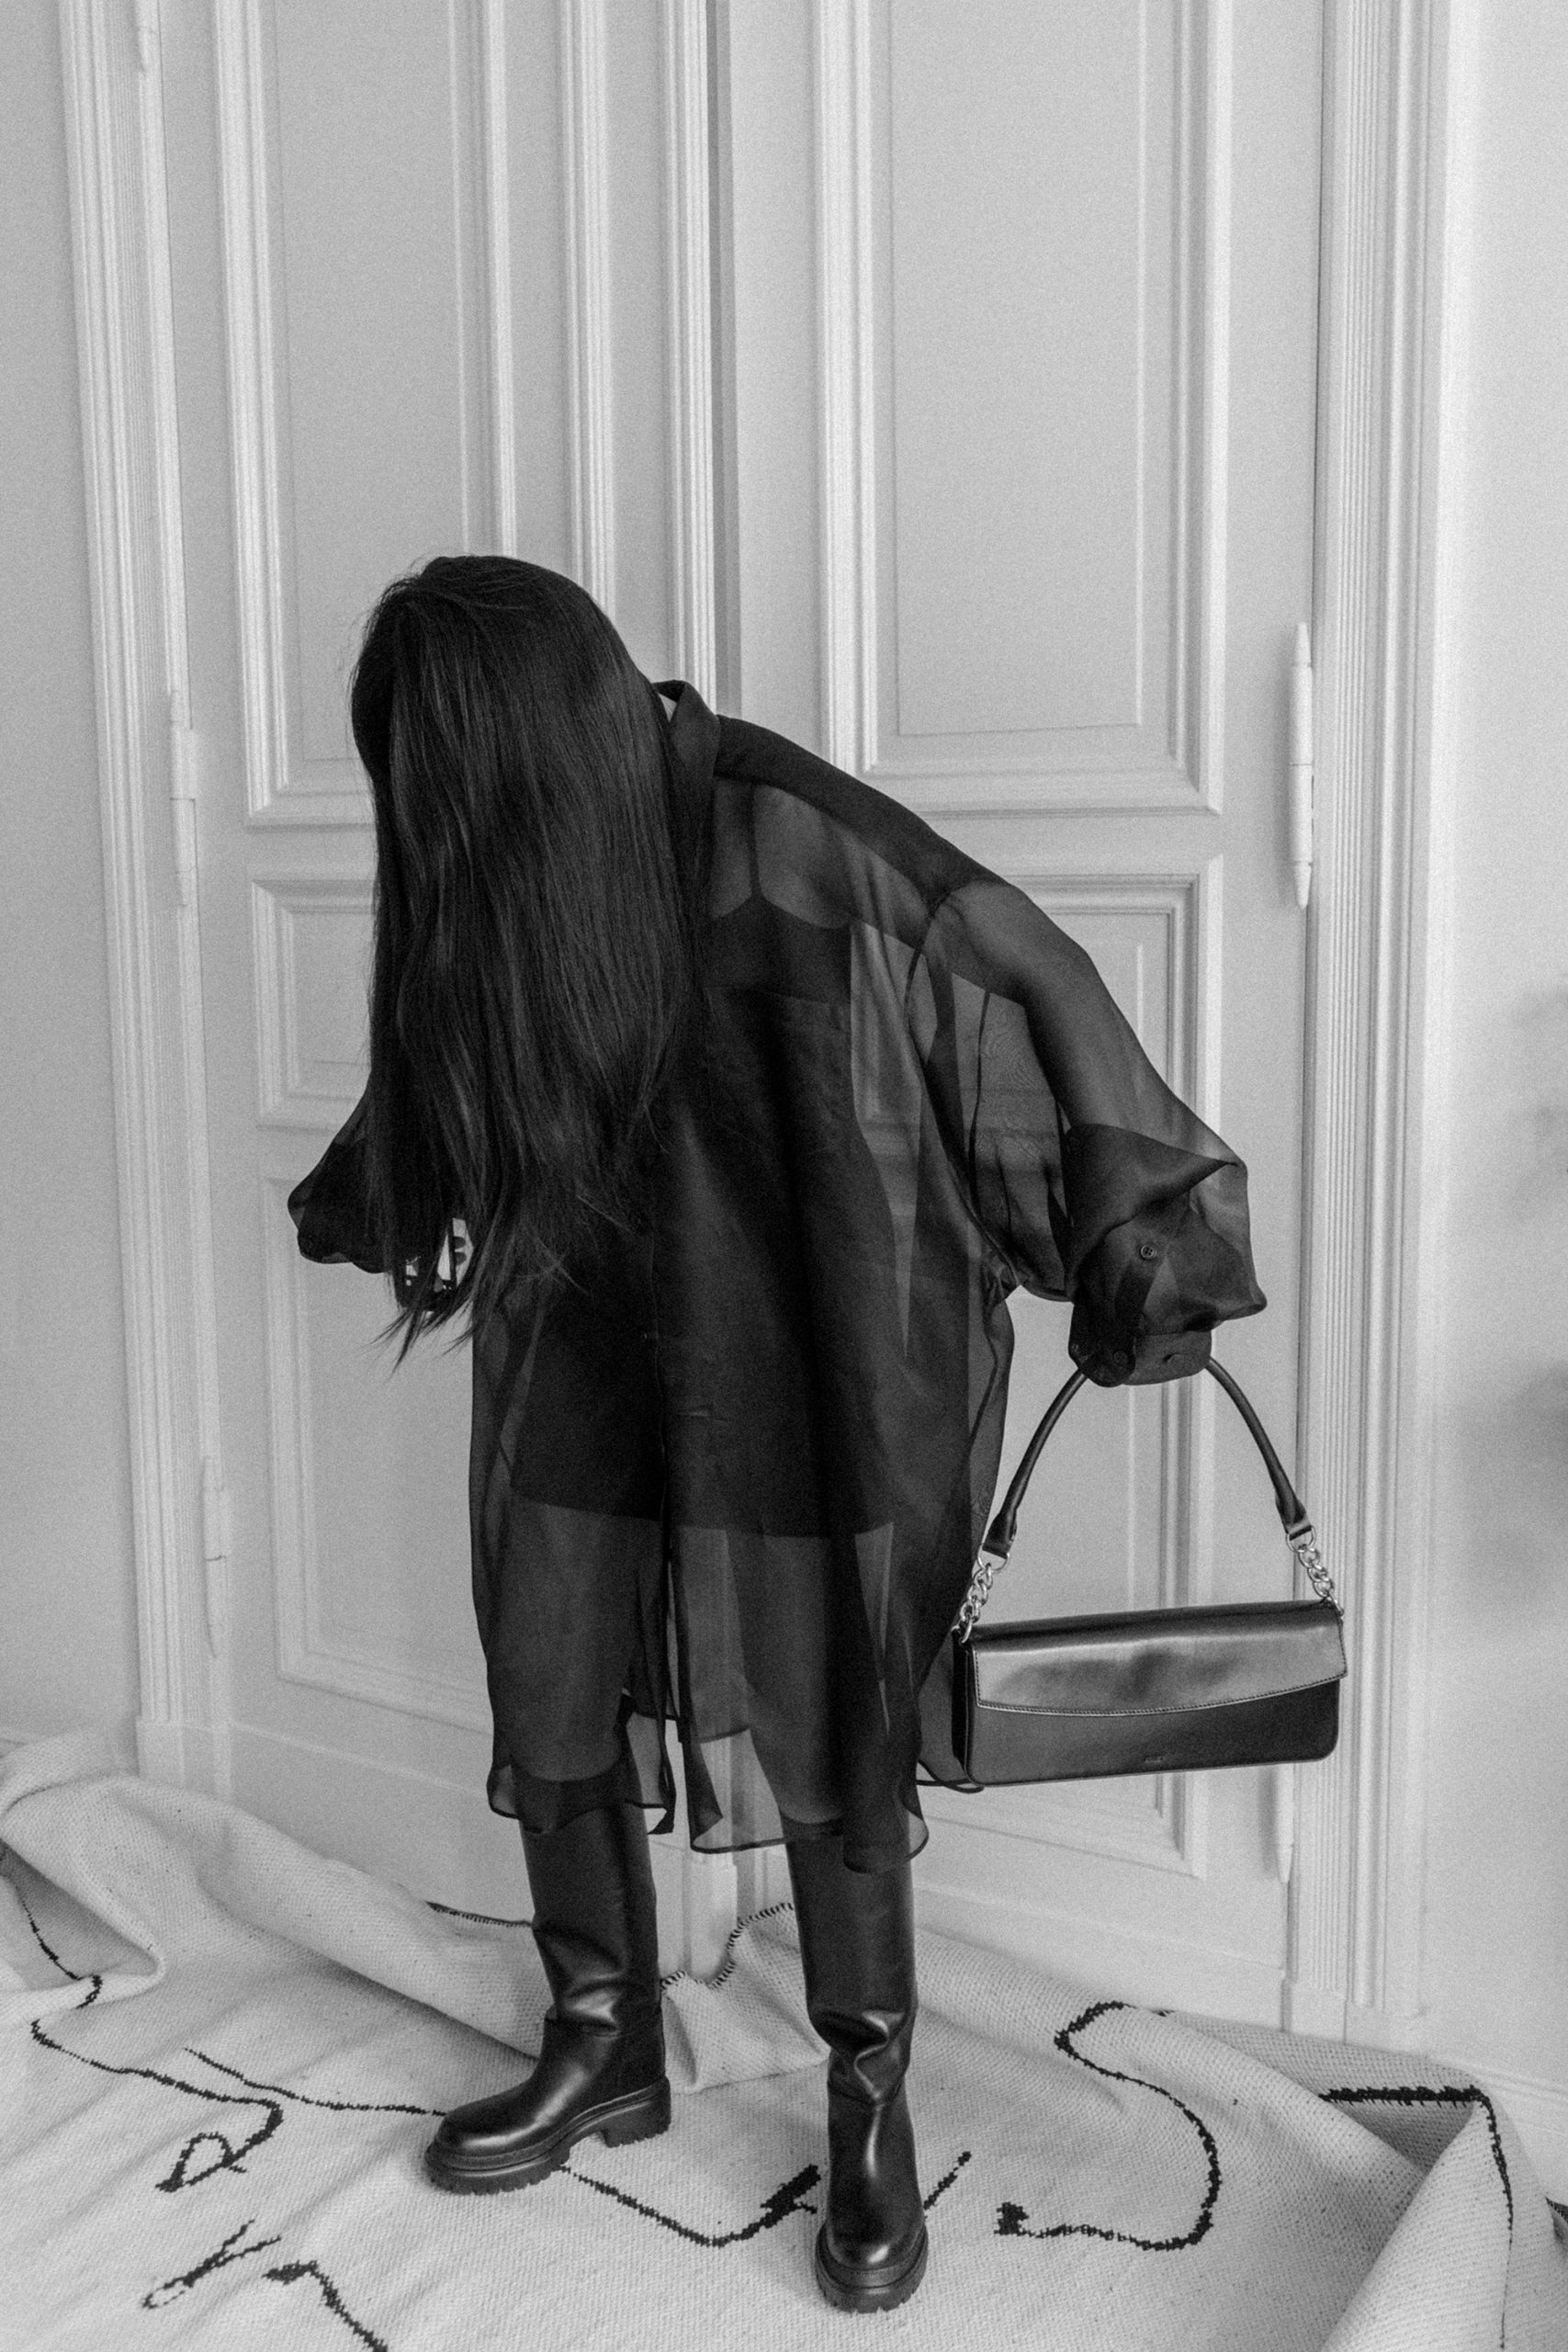 Maison Margiela Oversized Silk-Organza Shirt & ARKET Elongated Shoudler Bag, Chunky Leather Boots – Minimalist All-Black Look by Alice M. Huynh / iHeartAlice.com – Travel, Lifestyle & Fashionblog based in Berlin, Germany